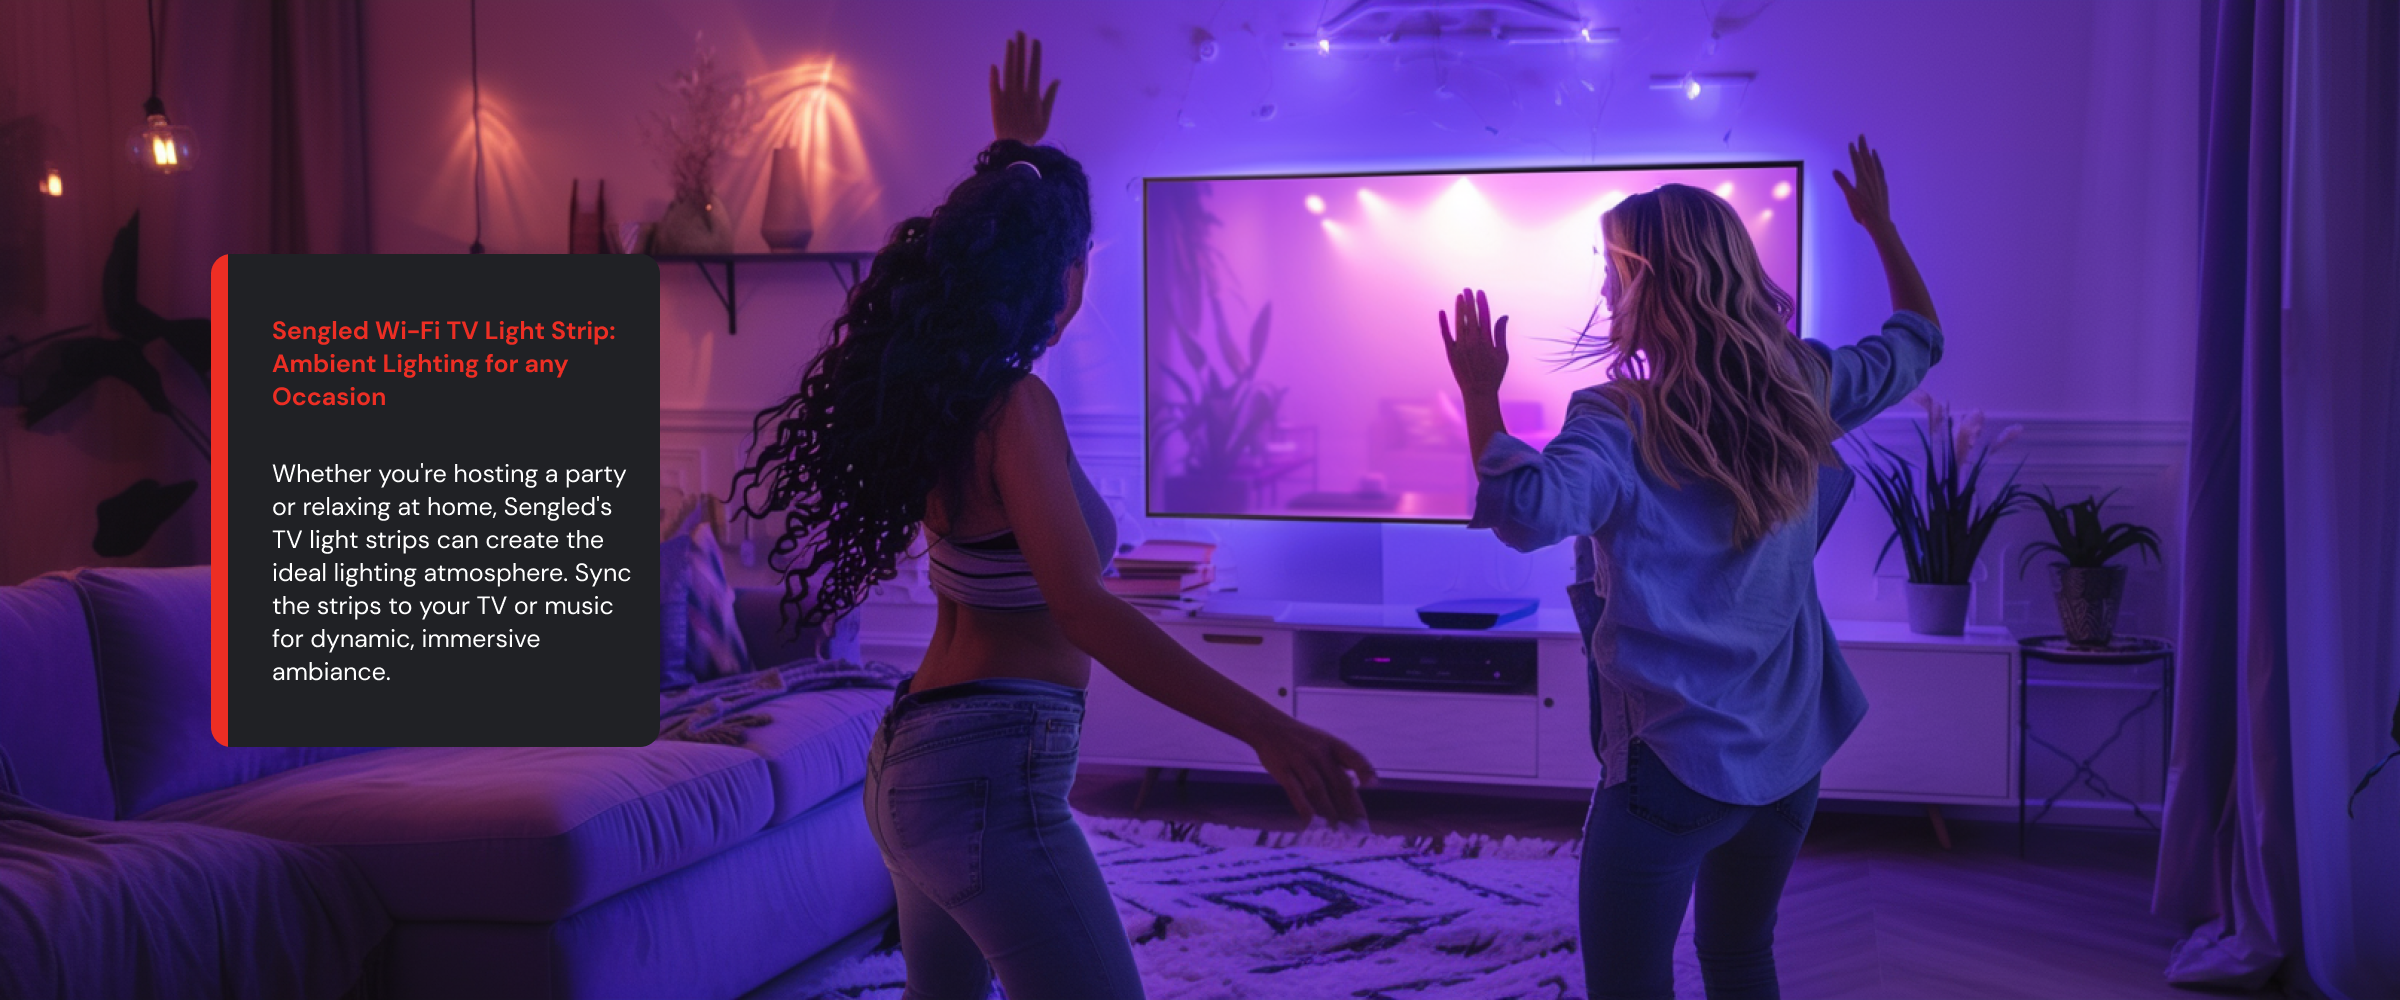 Ambient Lighting for any Occasion Whether you're hosting a party or relaxing at home, Sengled's TV light strips can create the ideal lighting atmosphere. Sync the strips to your TV or music for dynamic, immersive ambiance.